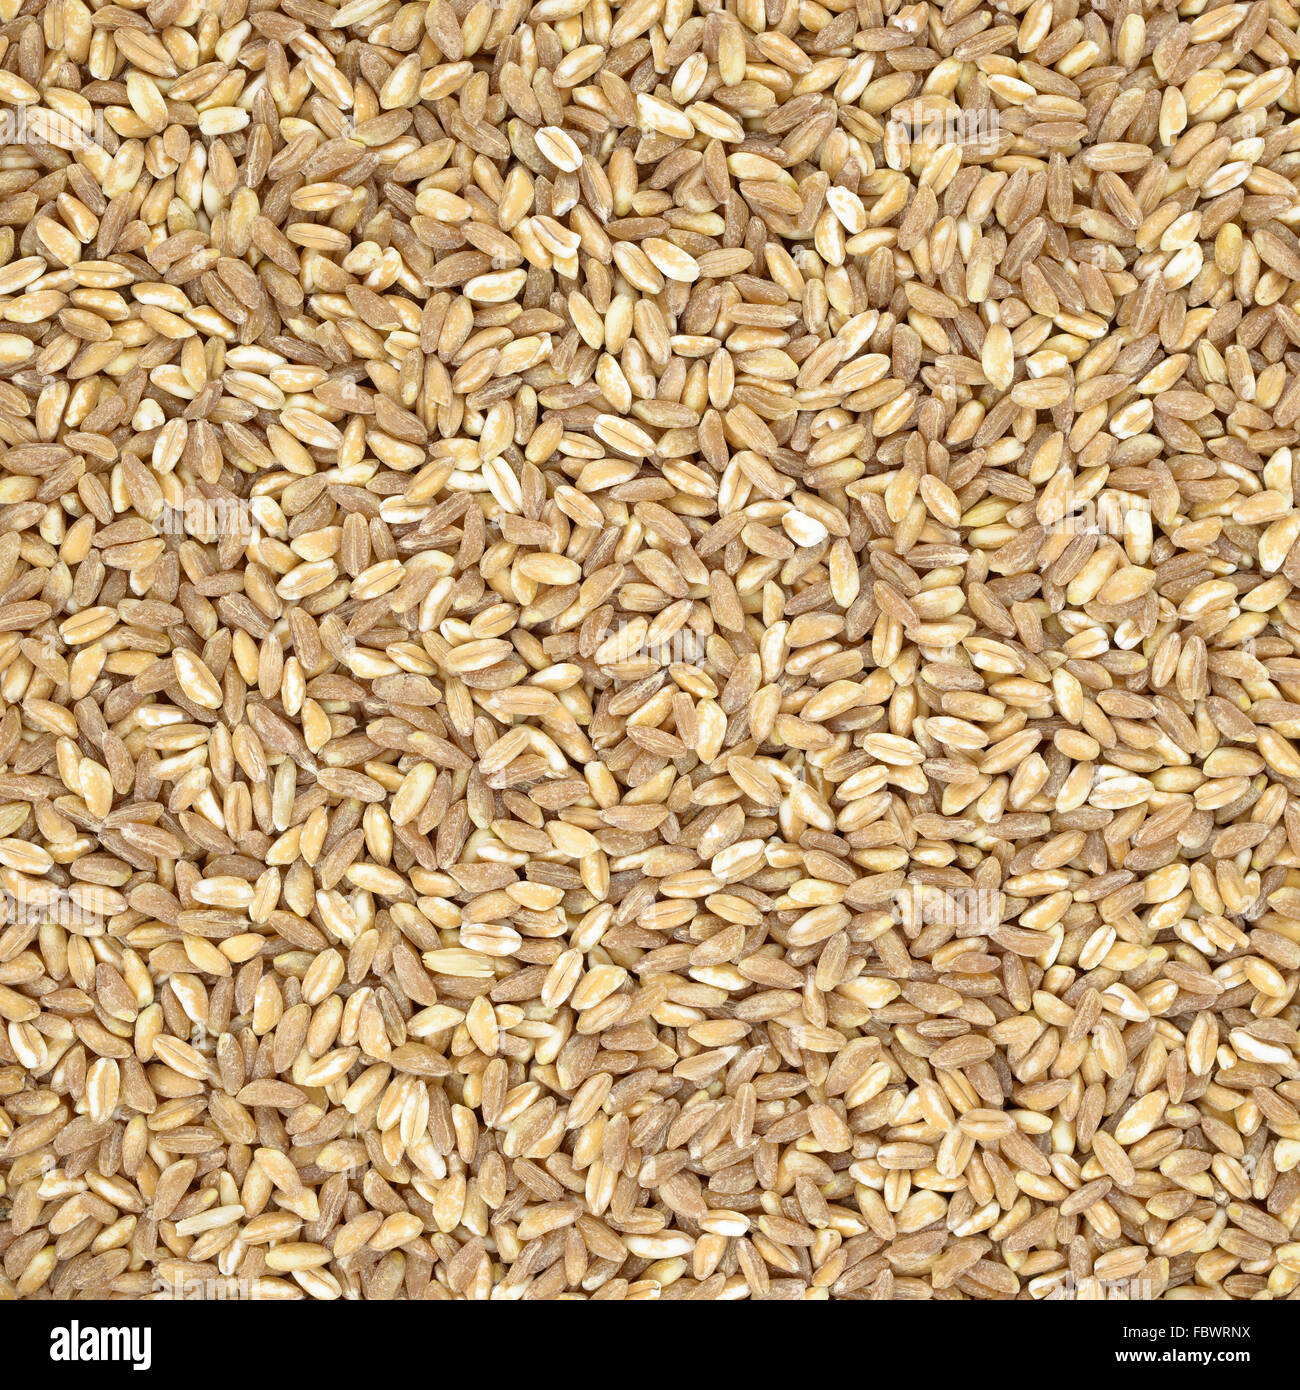 Spelt organic wheat raw cereal close up texture or background. Italian healthy eating Stock Photo